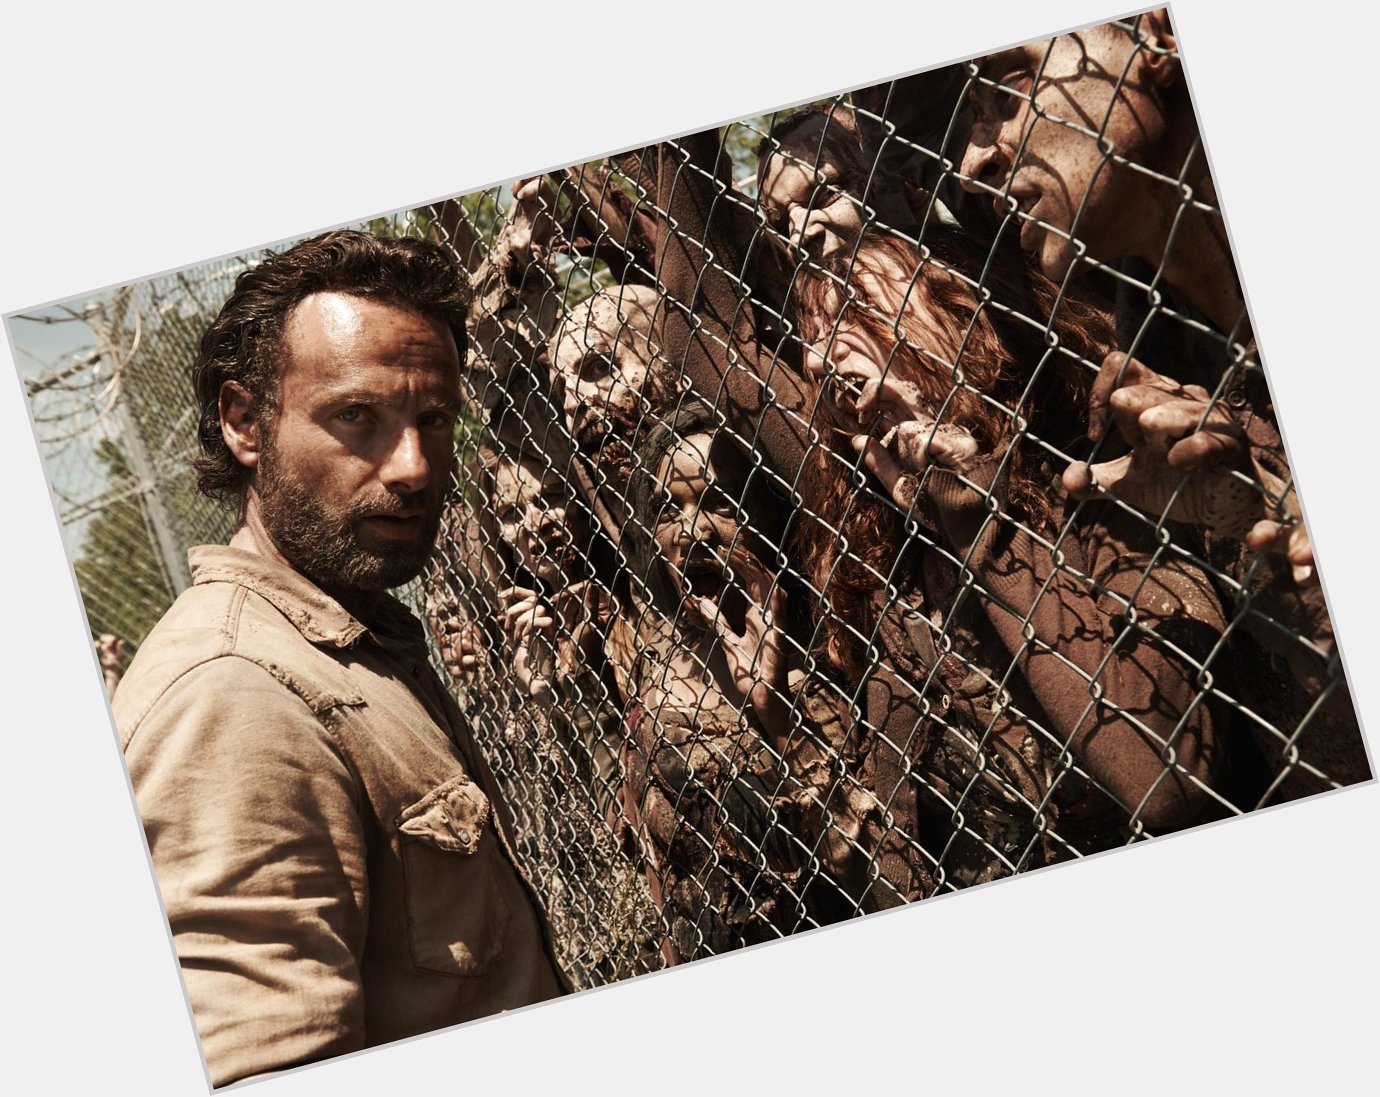 Today in Geek History: Happy Birthday Andrew Lincoln, AKA Rick Grimes! We\ll give you a pass on fence duty for today. 